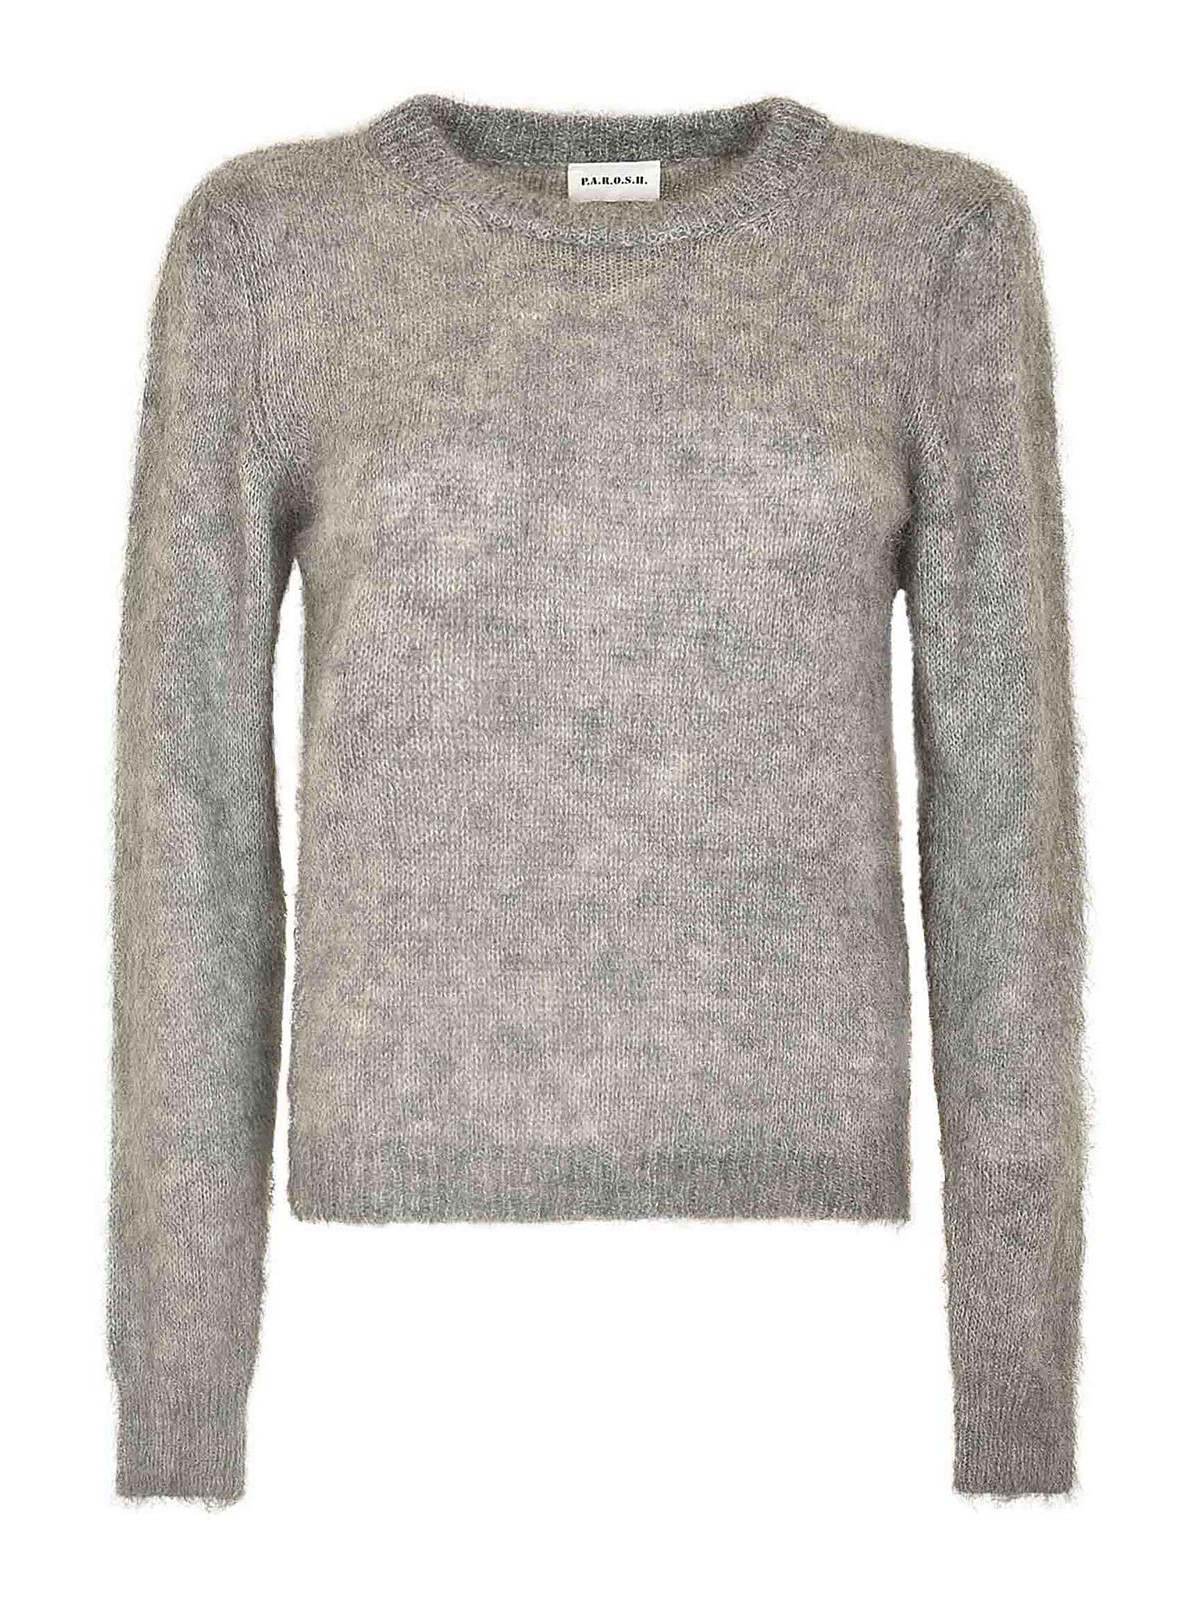 P.a.r.o.s.h Blended Sweater In Grey